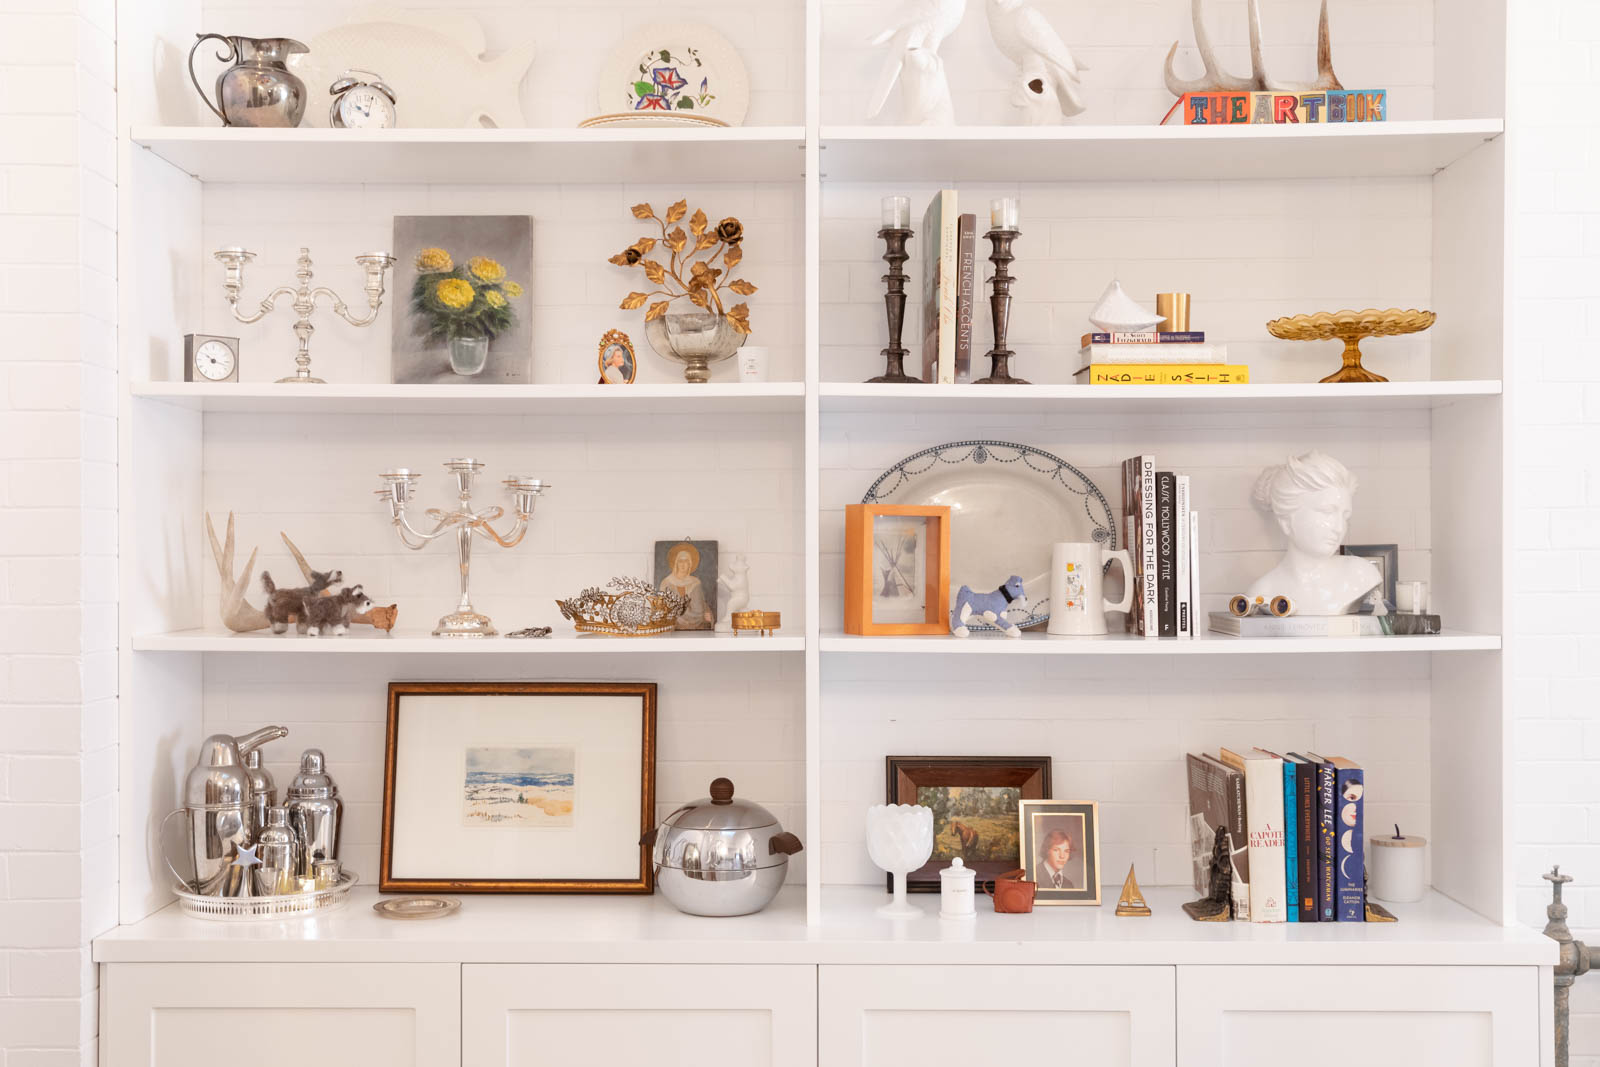 A custom-built shelving unit with a variety of knick-knacks